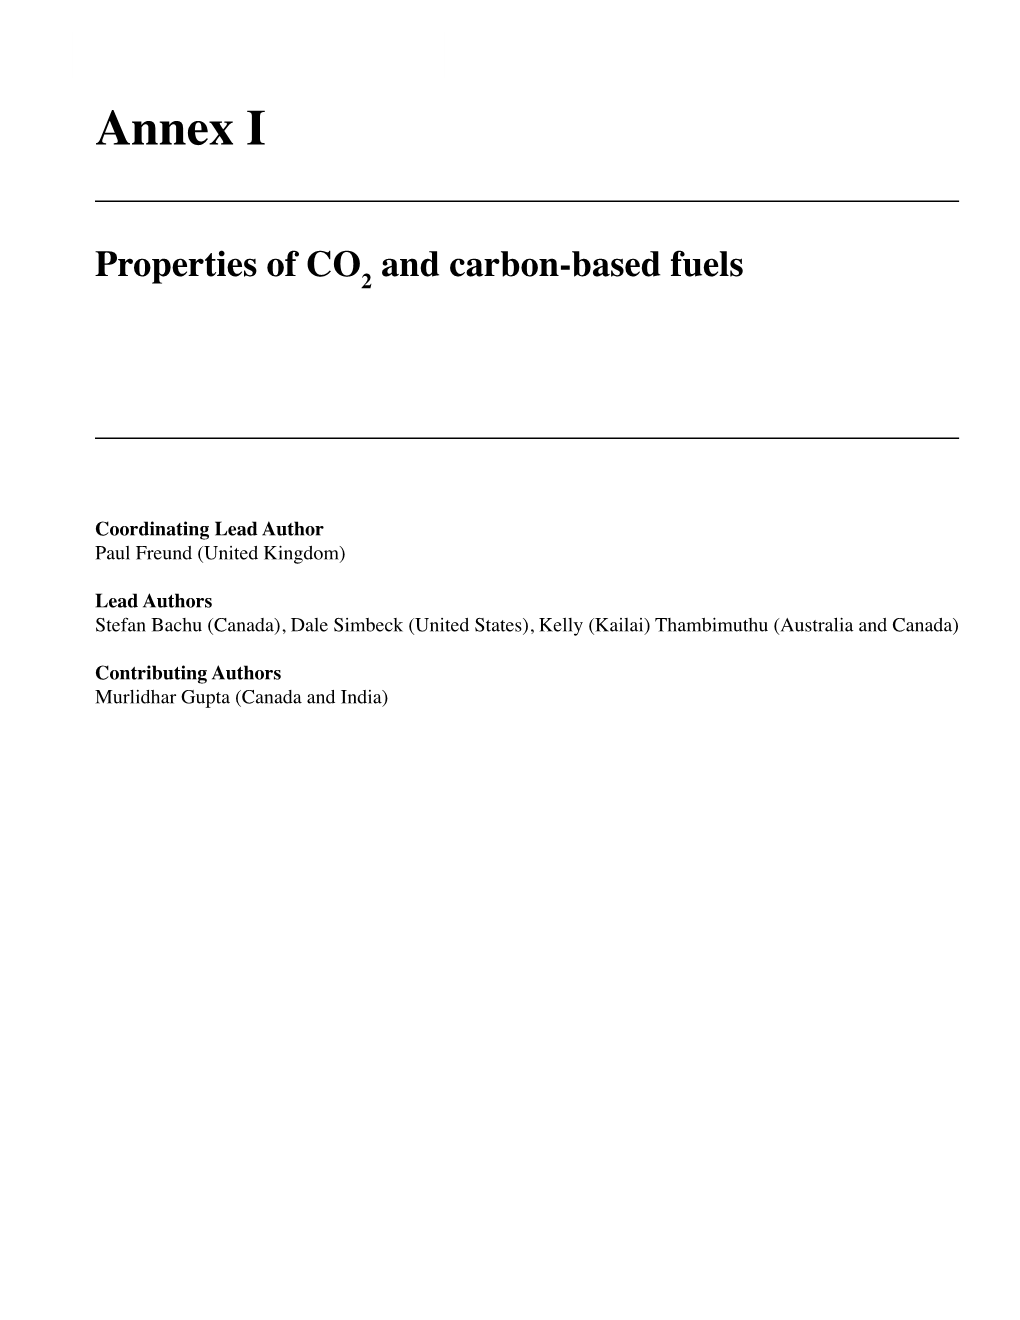 Annex I: Properties of CO2 and Carbon-Based Fuels 383 Annex I